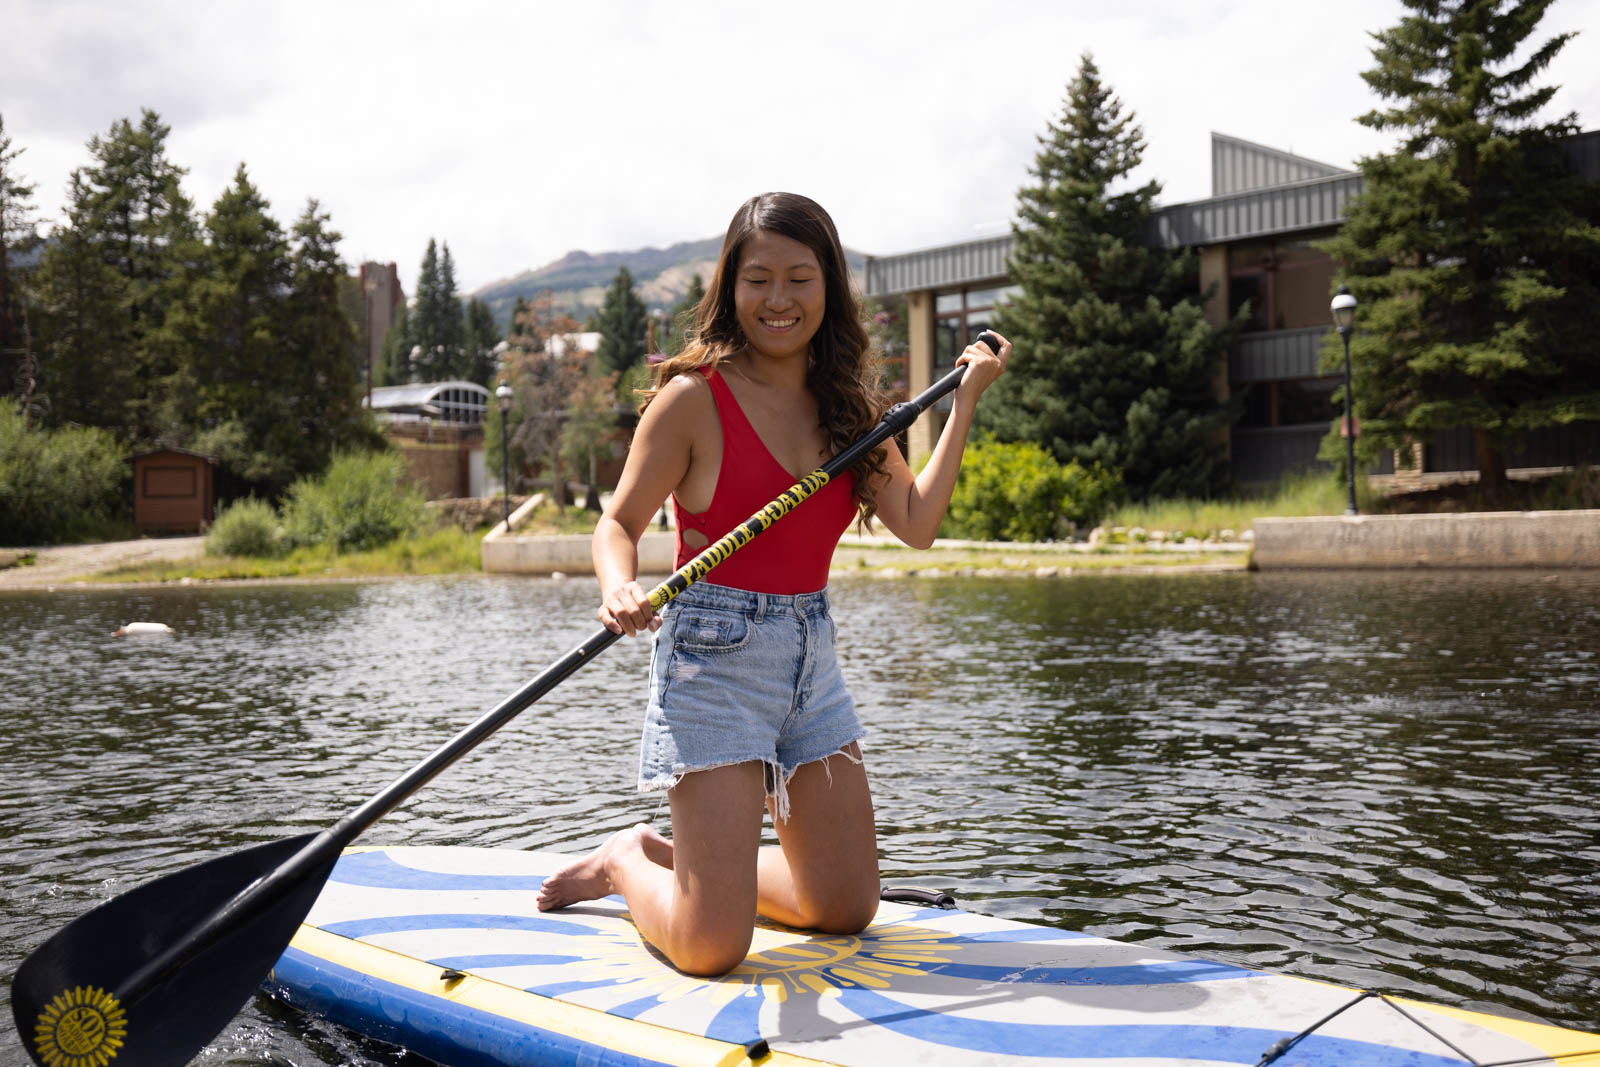 A woman stand-up paddleboarding on Maggie Pond on a sunny summer day in Breckenridge.